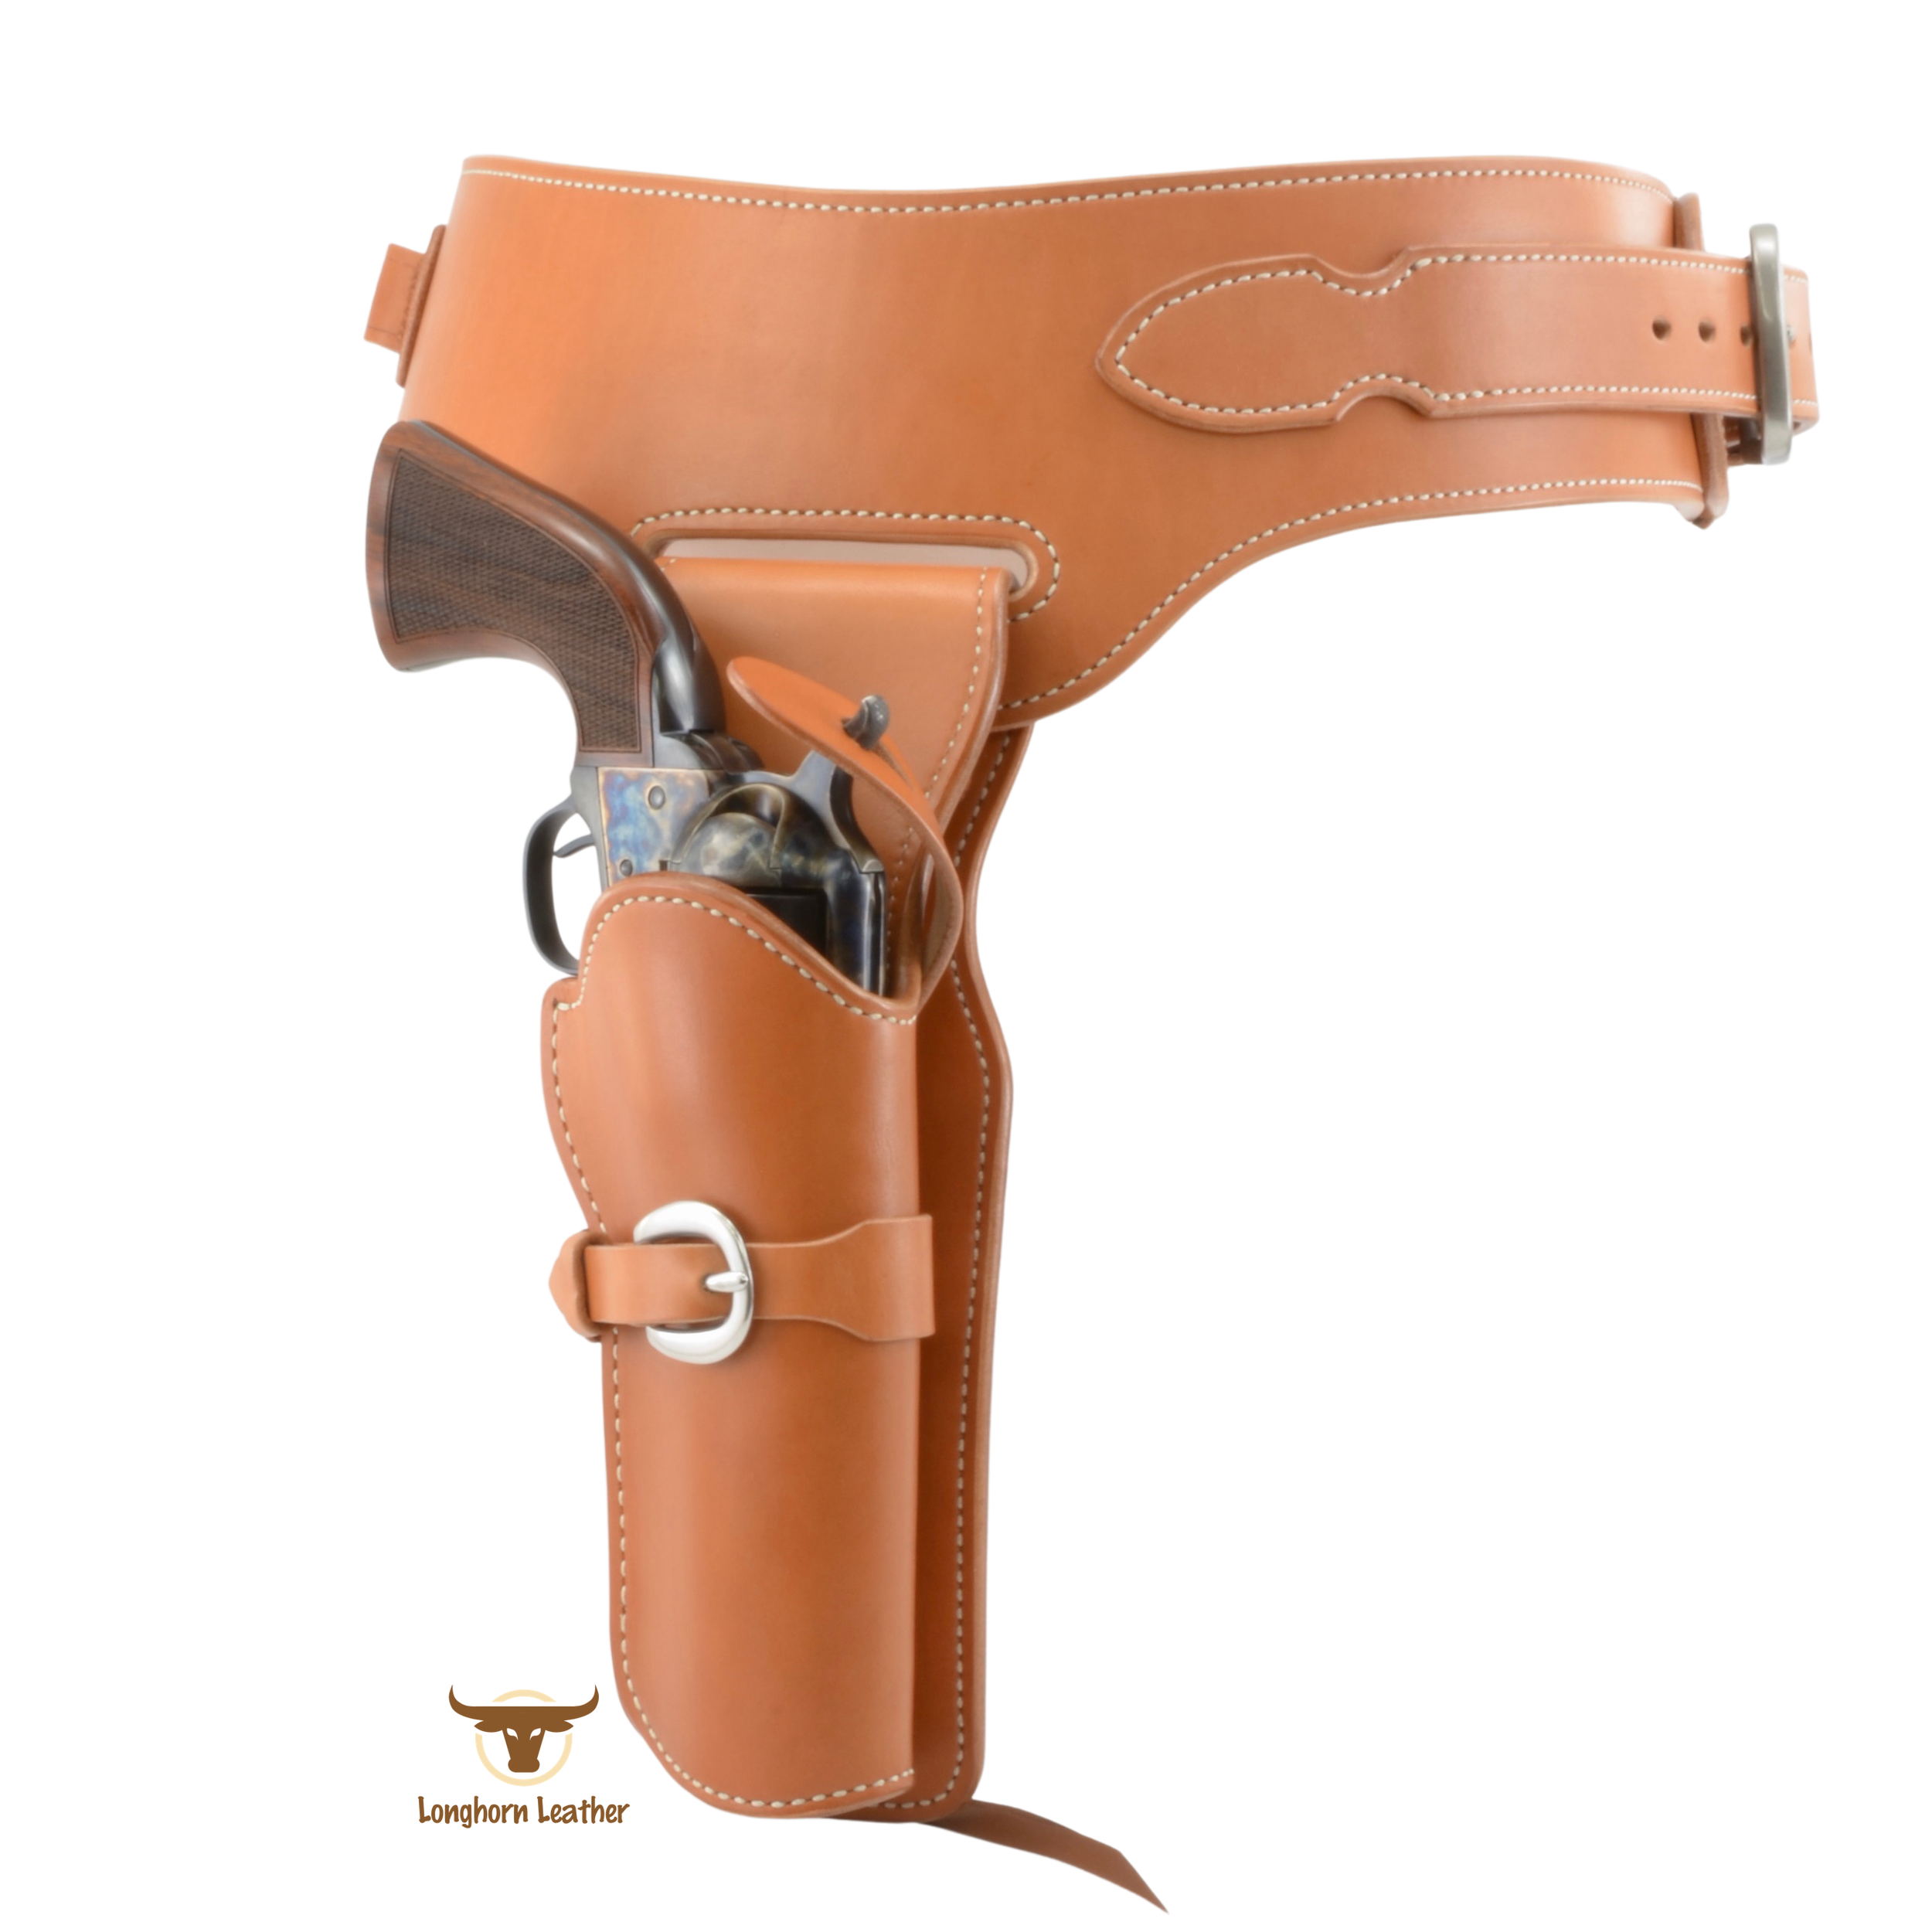 Custom leather single action holster and buscadero belt.  Individually handcrafted at Longhorn Leather AZ